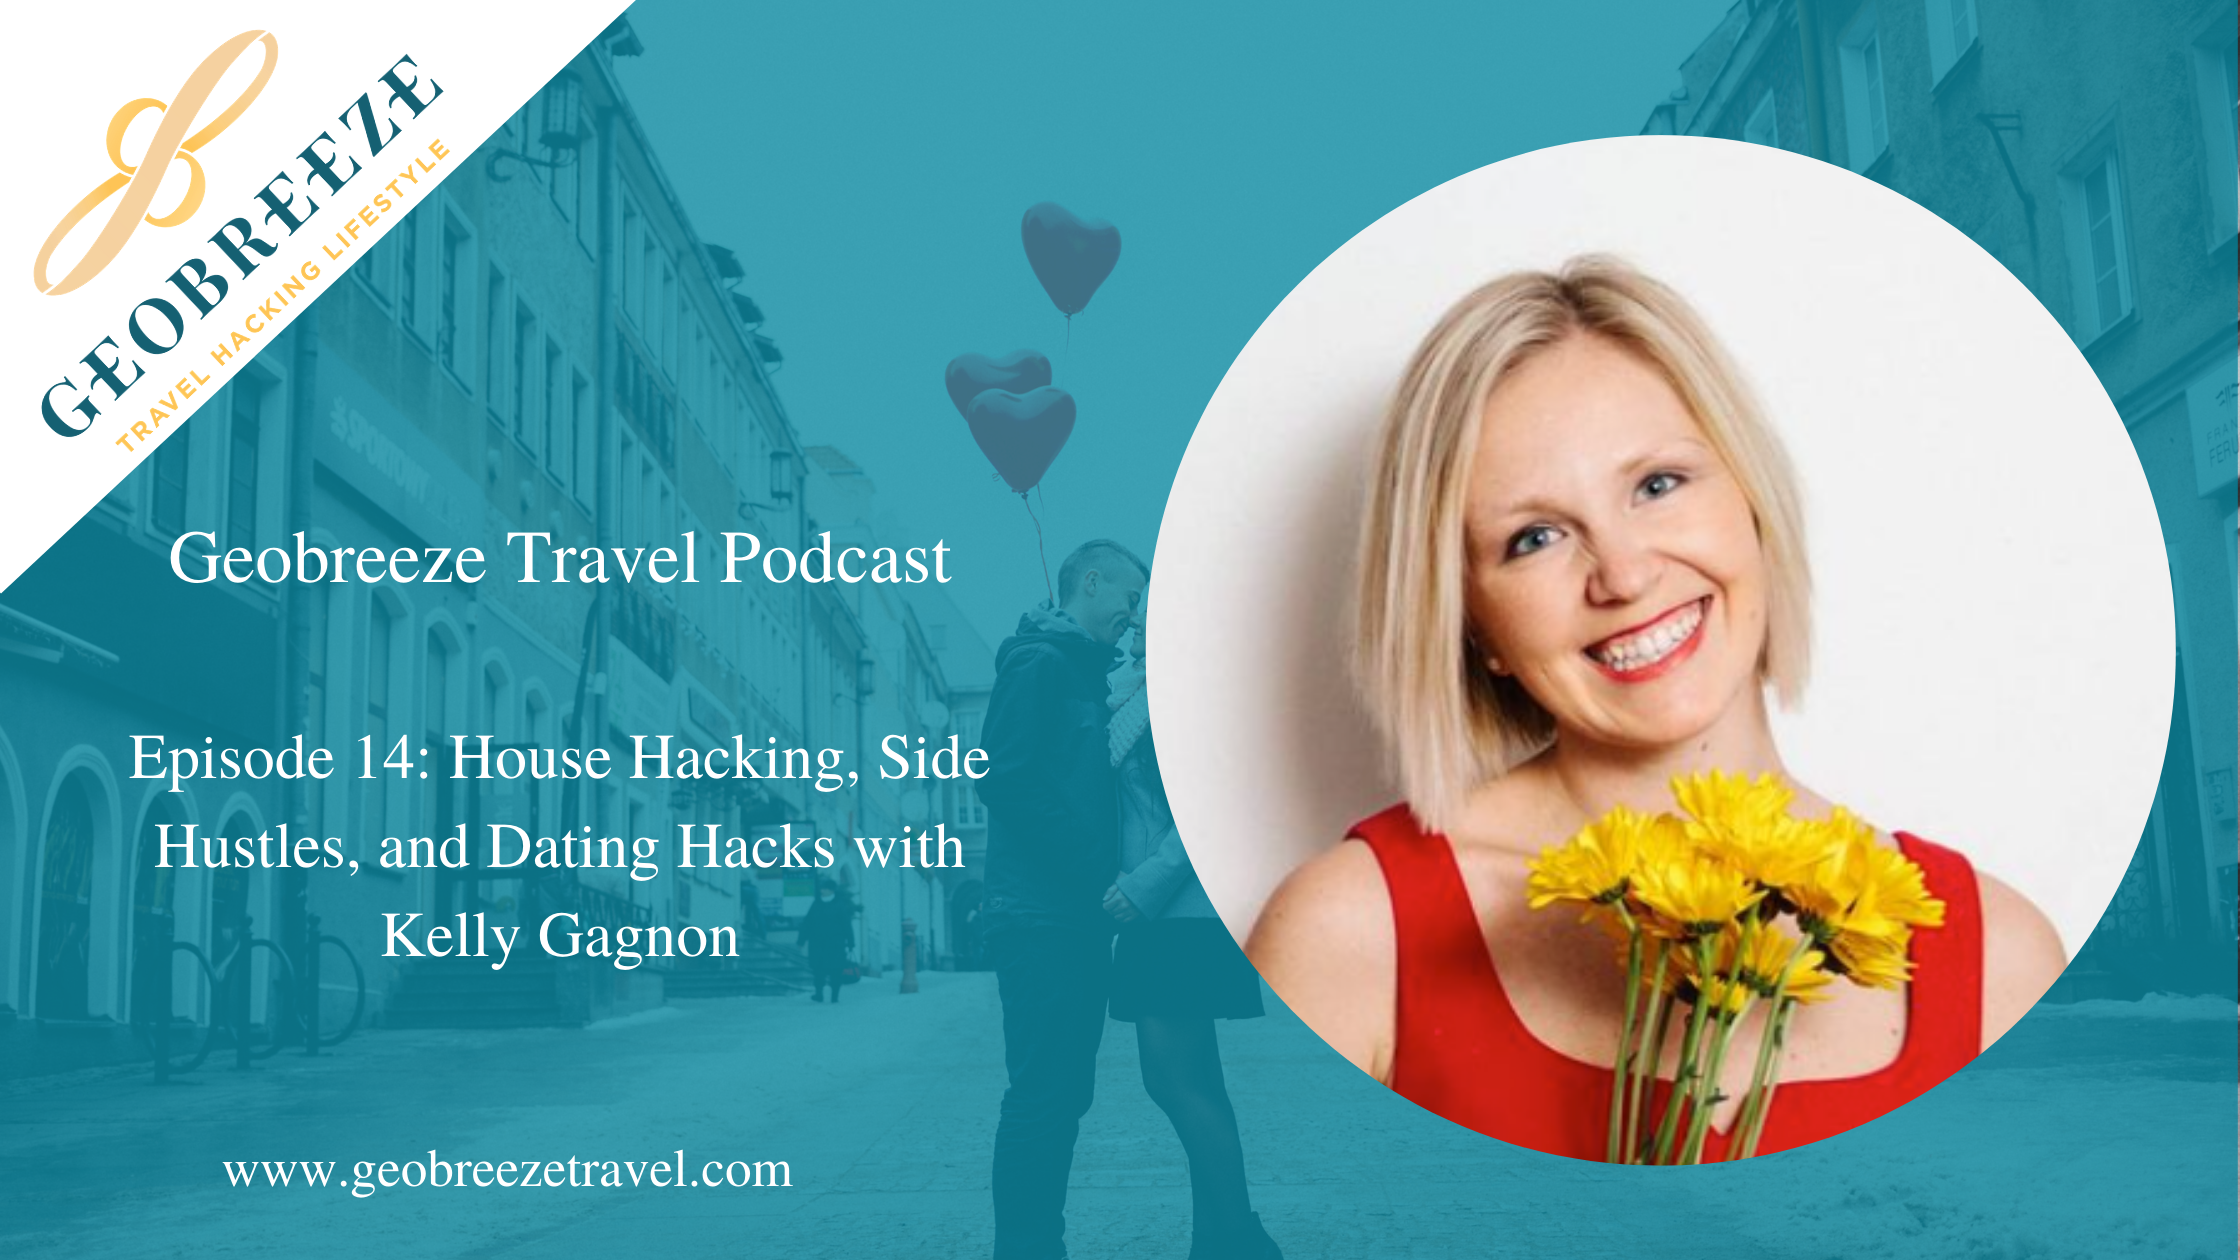 Episode 14: House Hacking, Side Hustles, and Dating Hacks with Kelly Gagnon